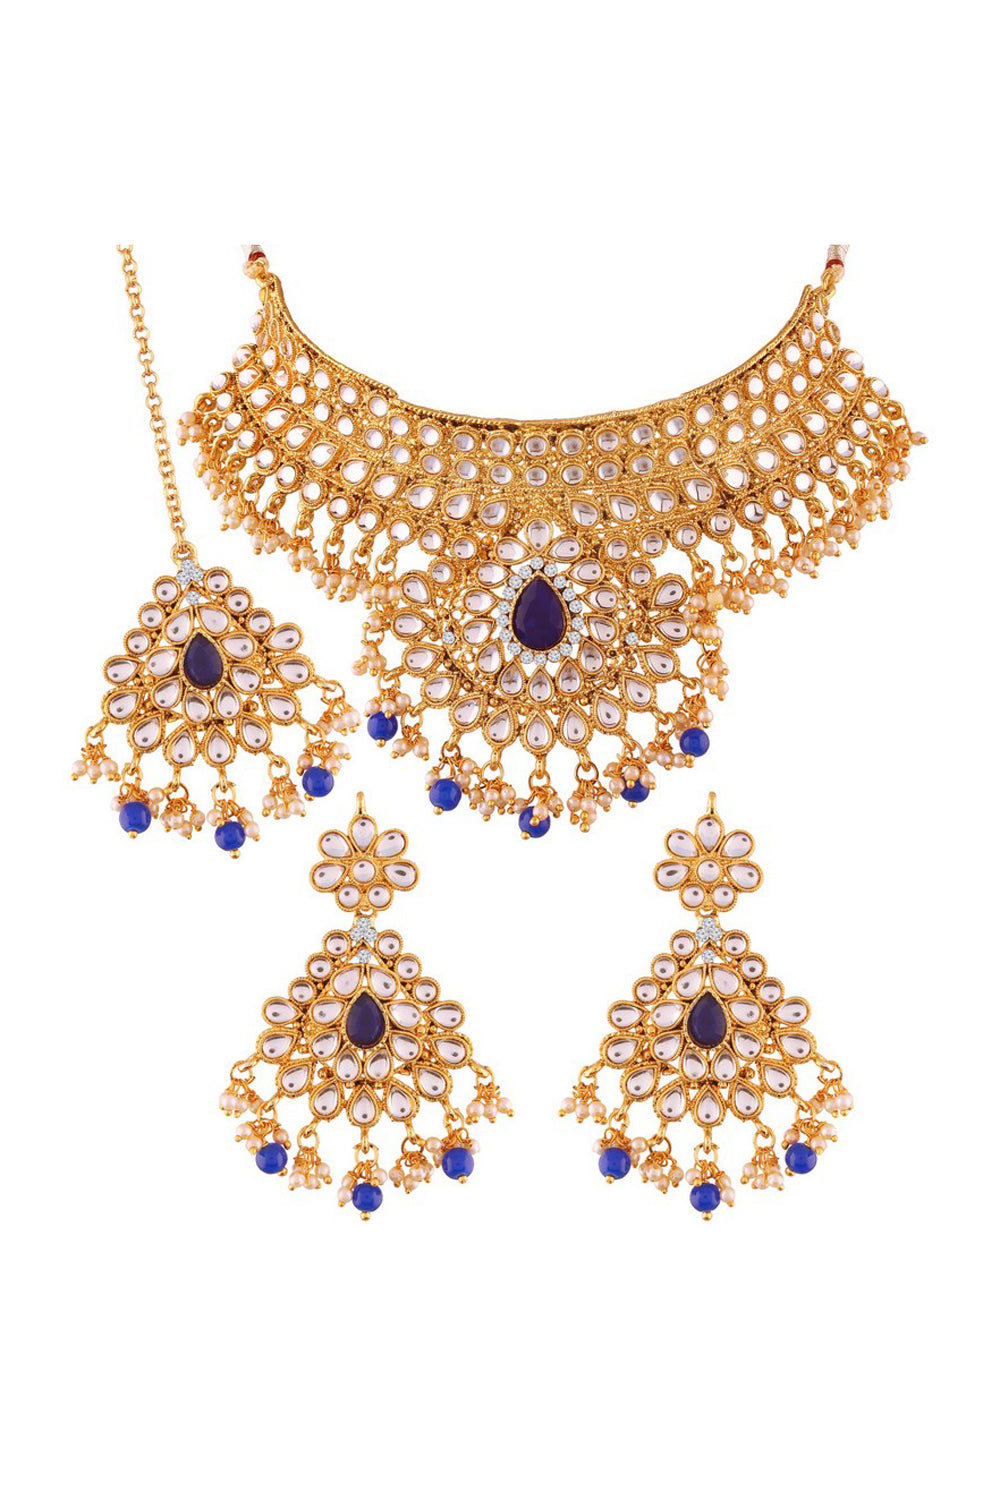 Alloy Choker Necklace Set with Maang Tikka in Blue